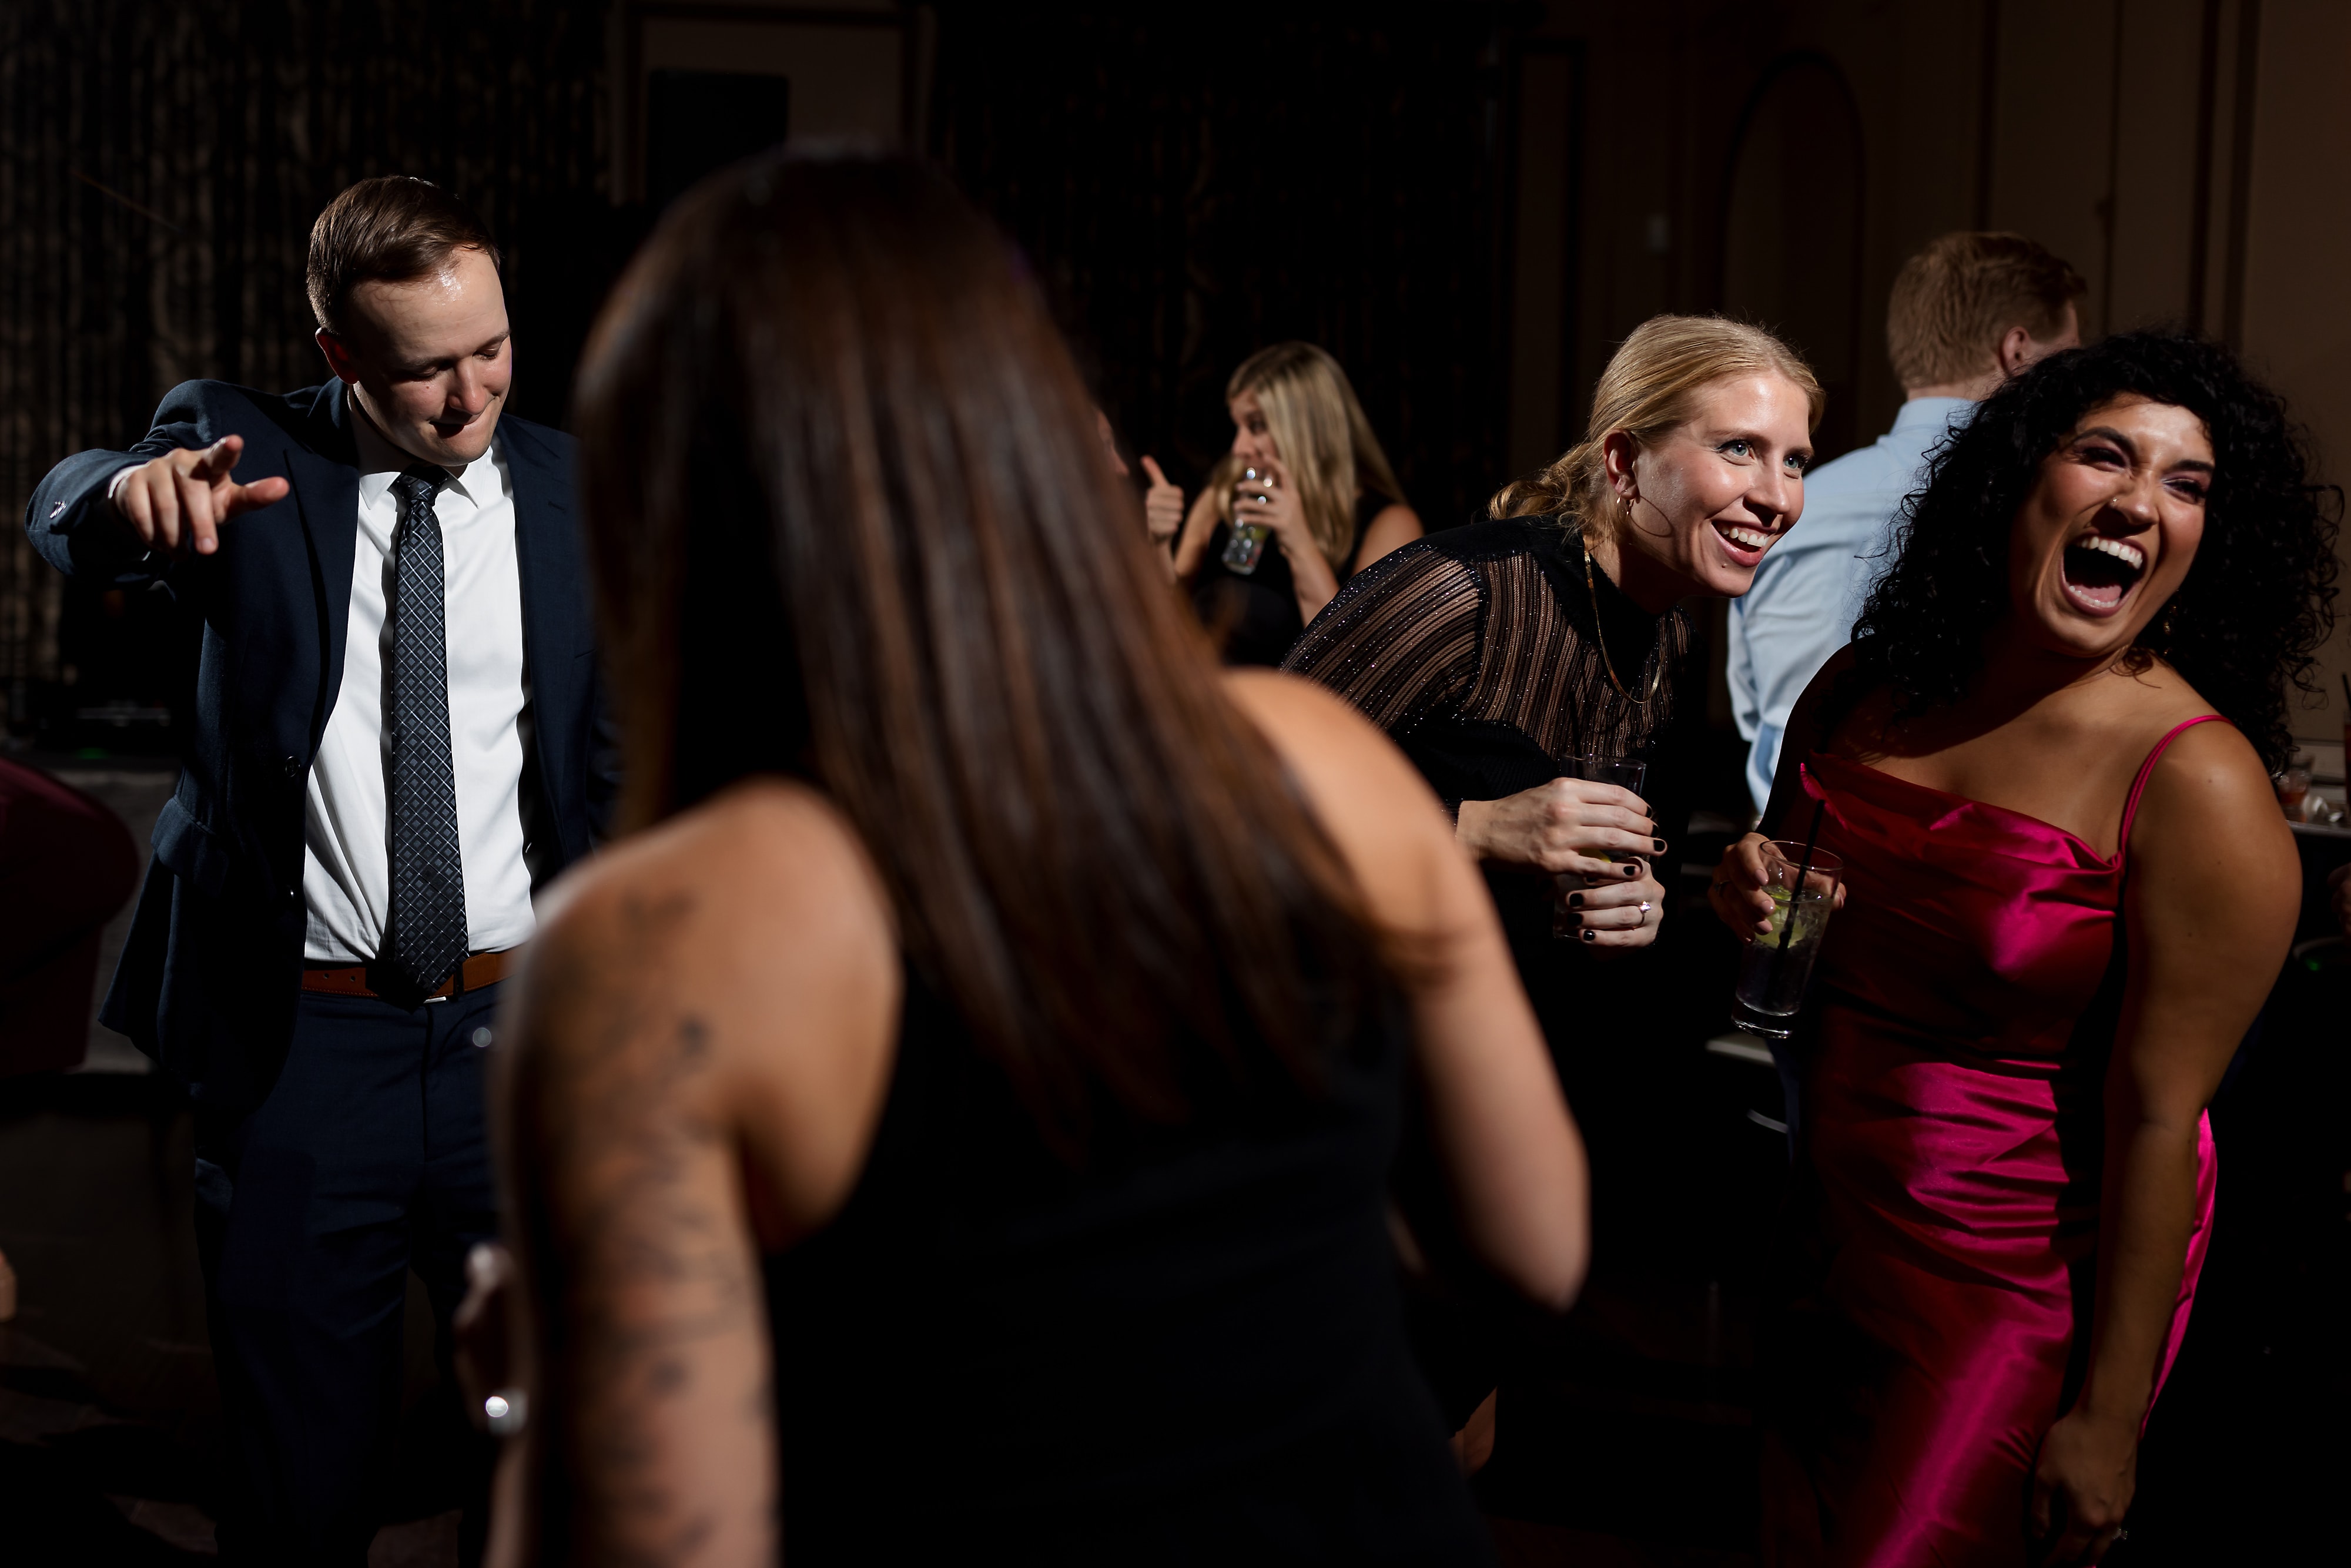 wedding guests dance during wedding reception at Salvatore's